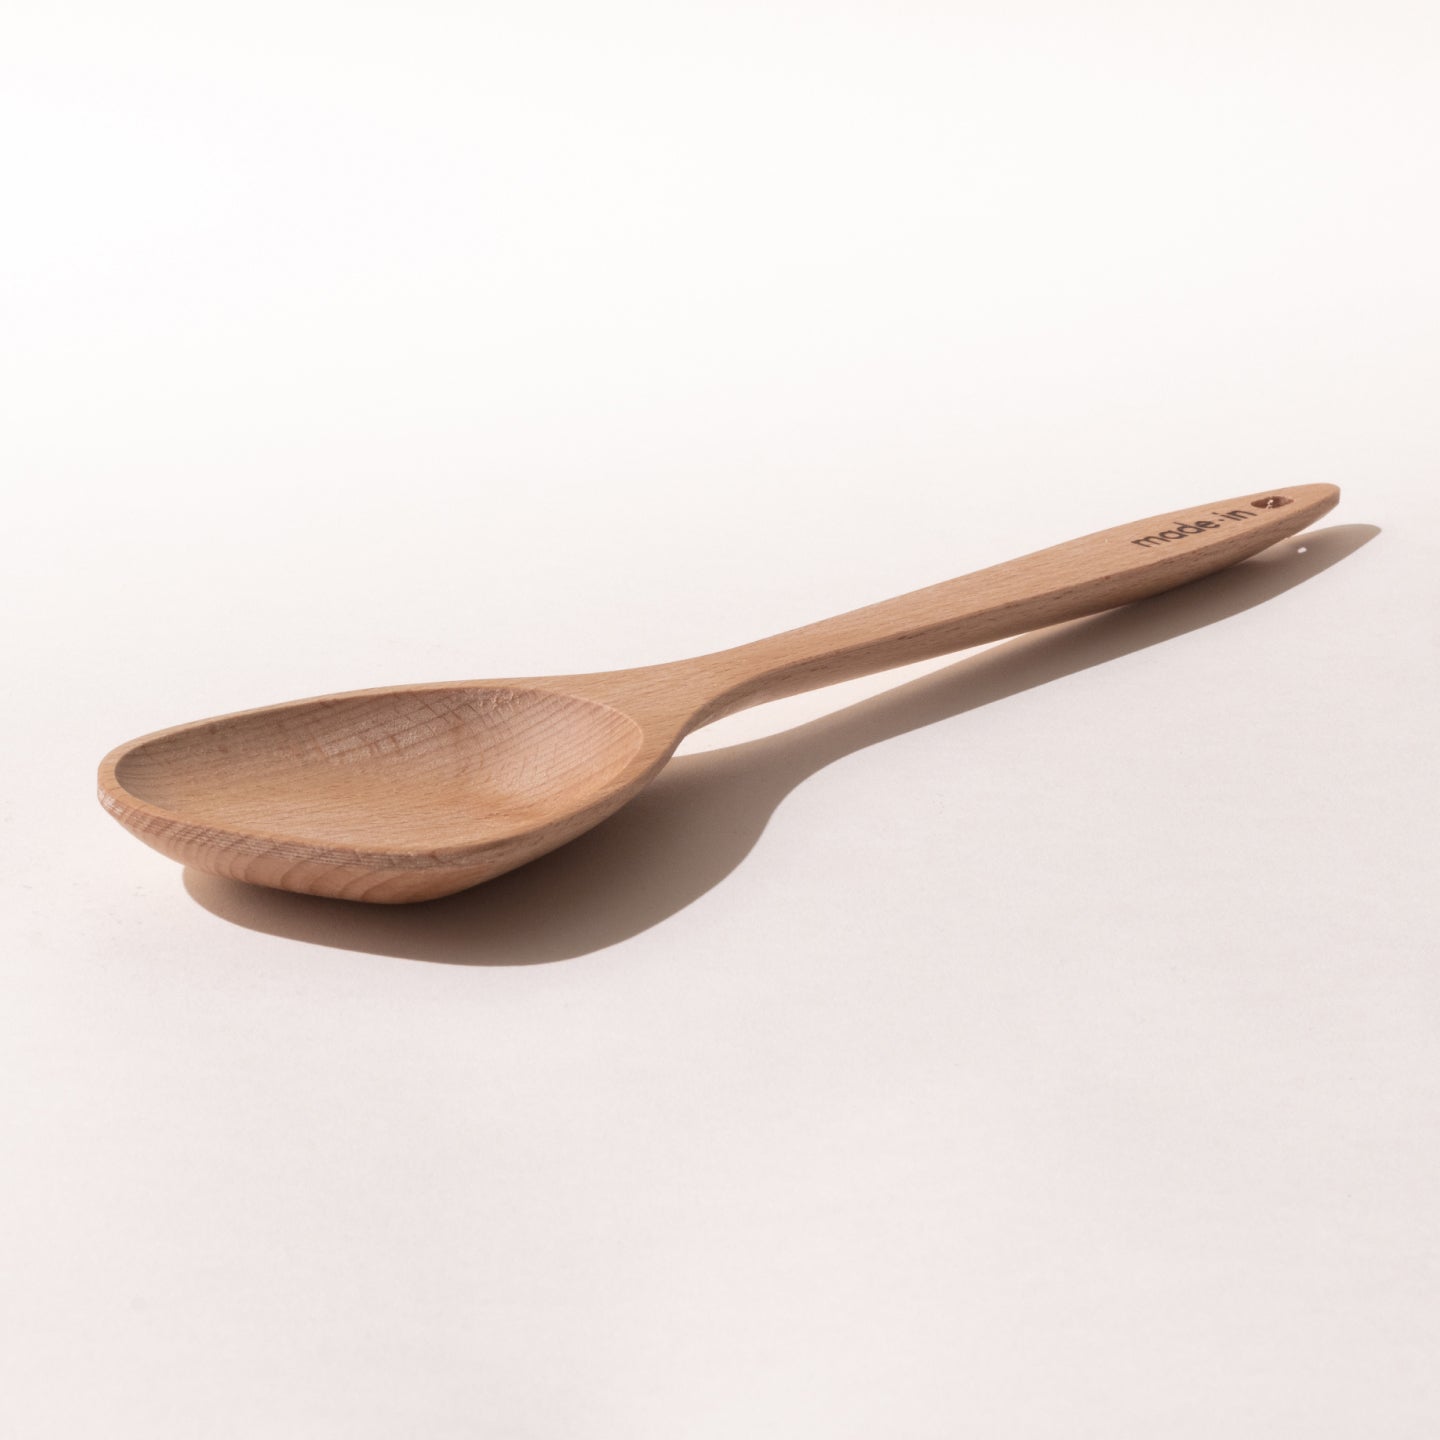 https://cdn.shopify.com/s/files/1/2131/5111/products/WoodenSpoon_PDP_Angle2.jpg?v=1690921993